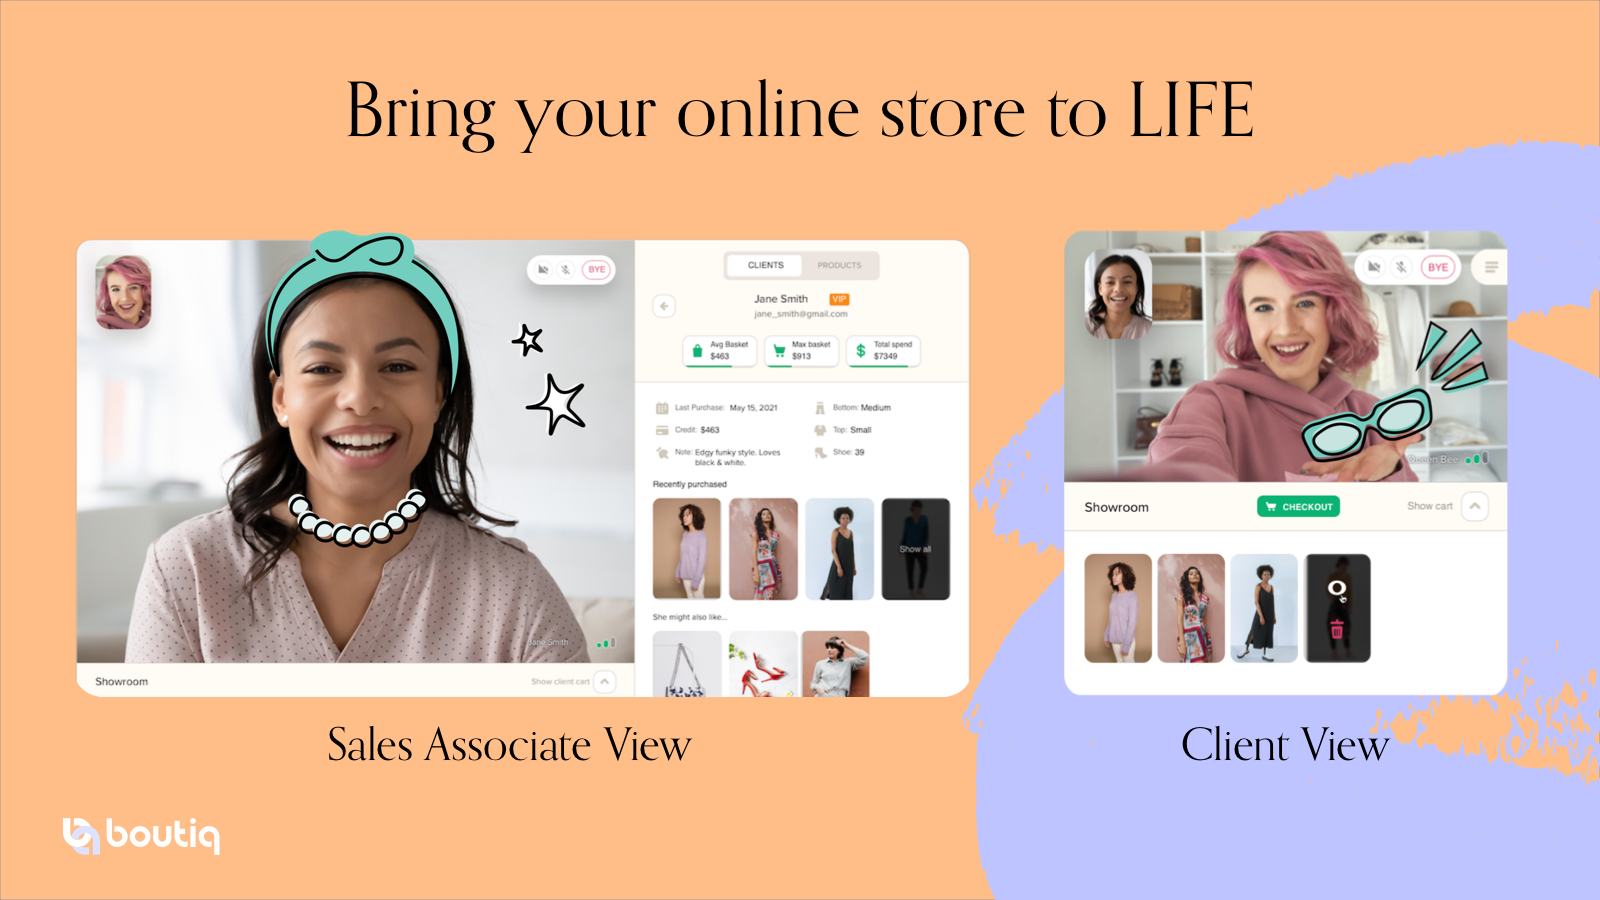 Boutiq - Bring Your Online Store to LIFE